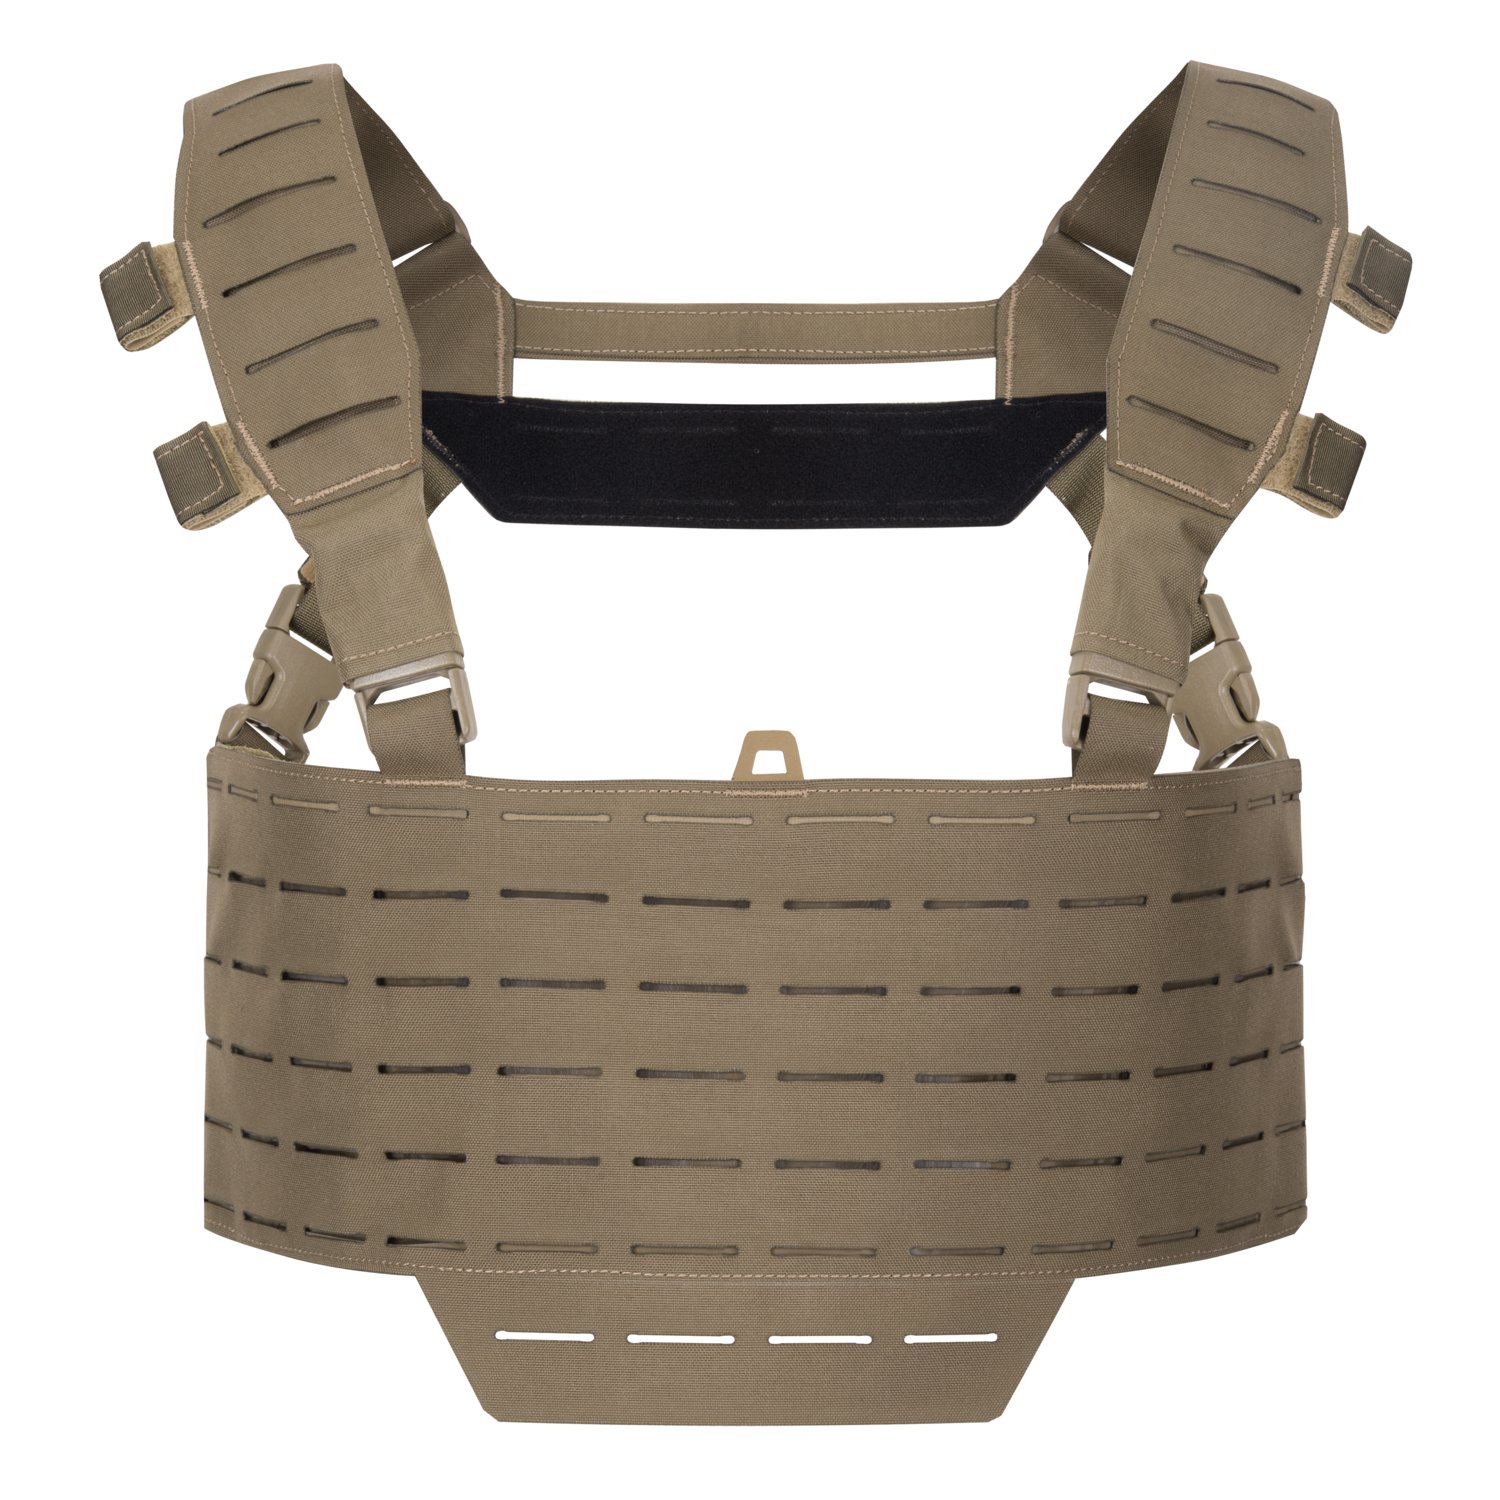 Warwick Slick Chest Rig | On Duty Equipment Contract Division